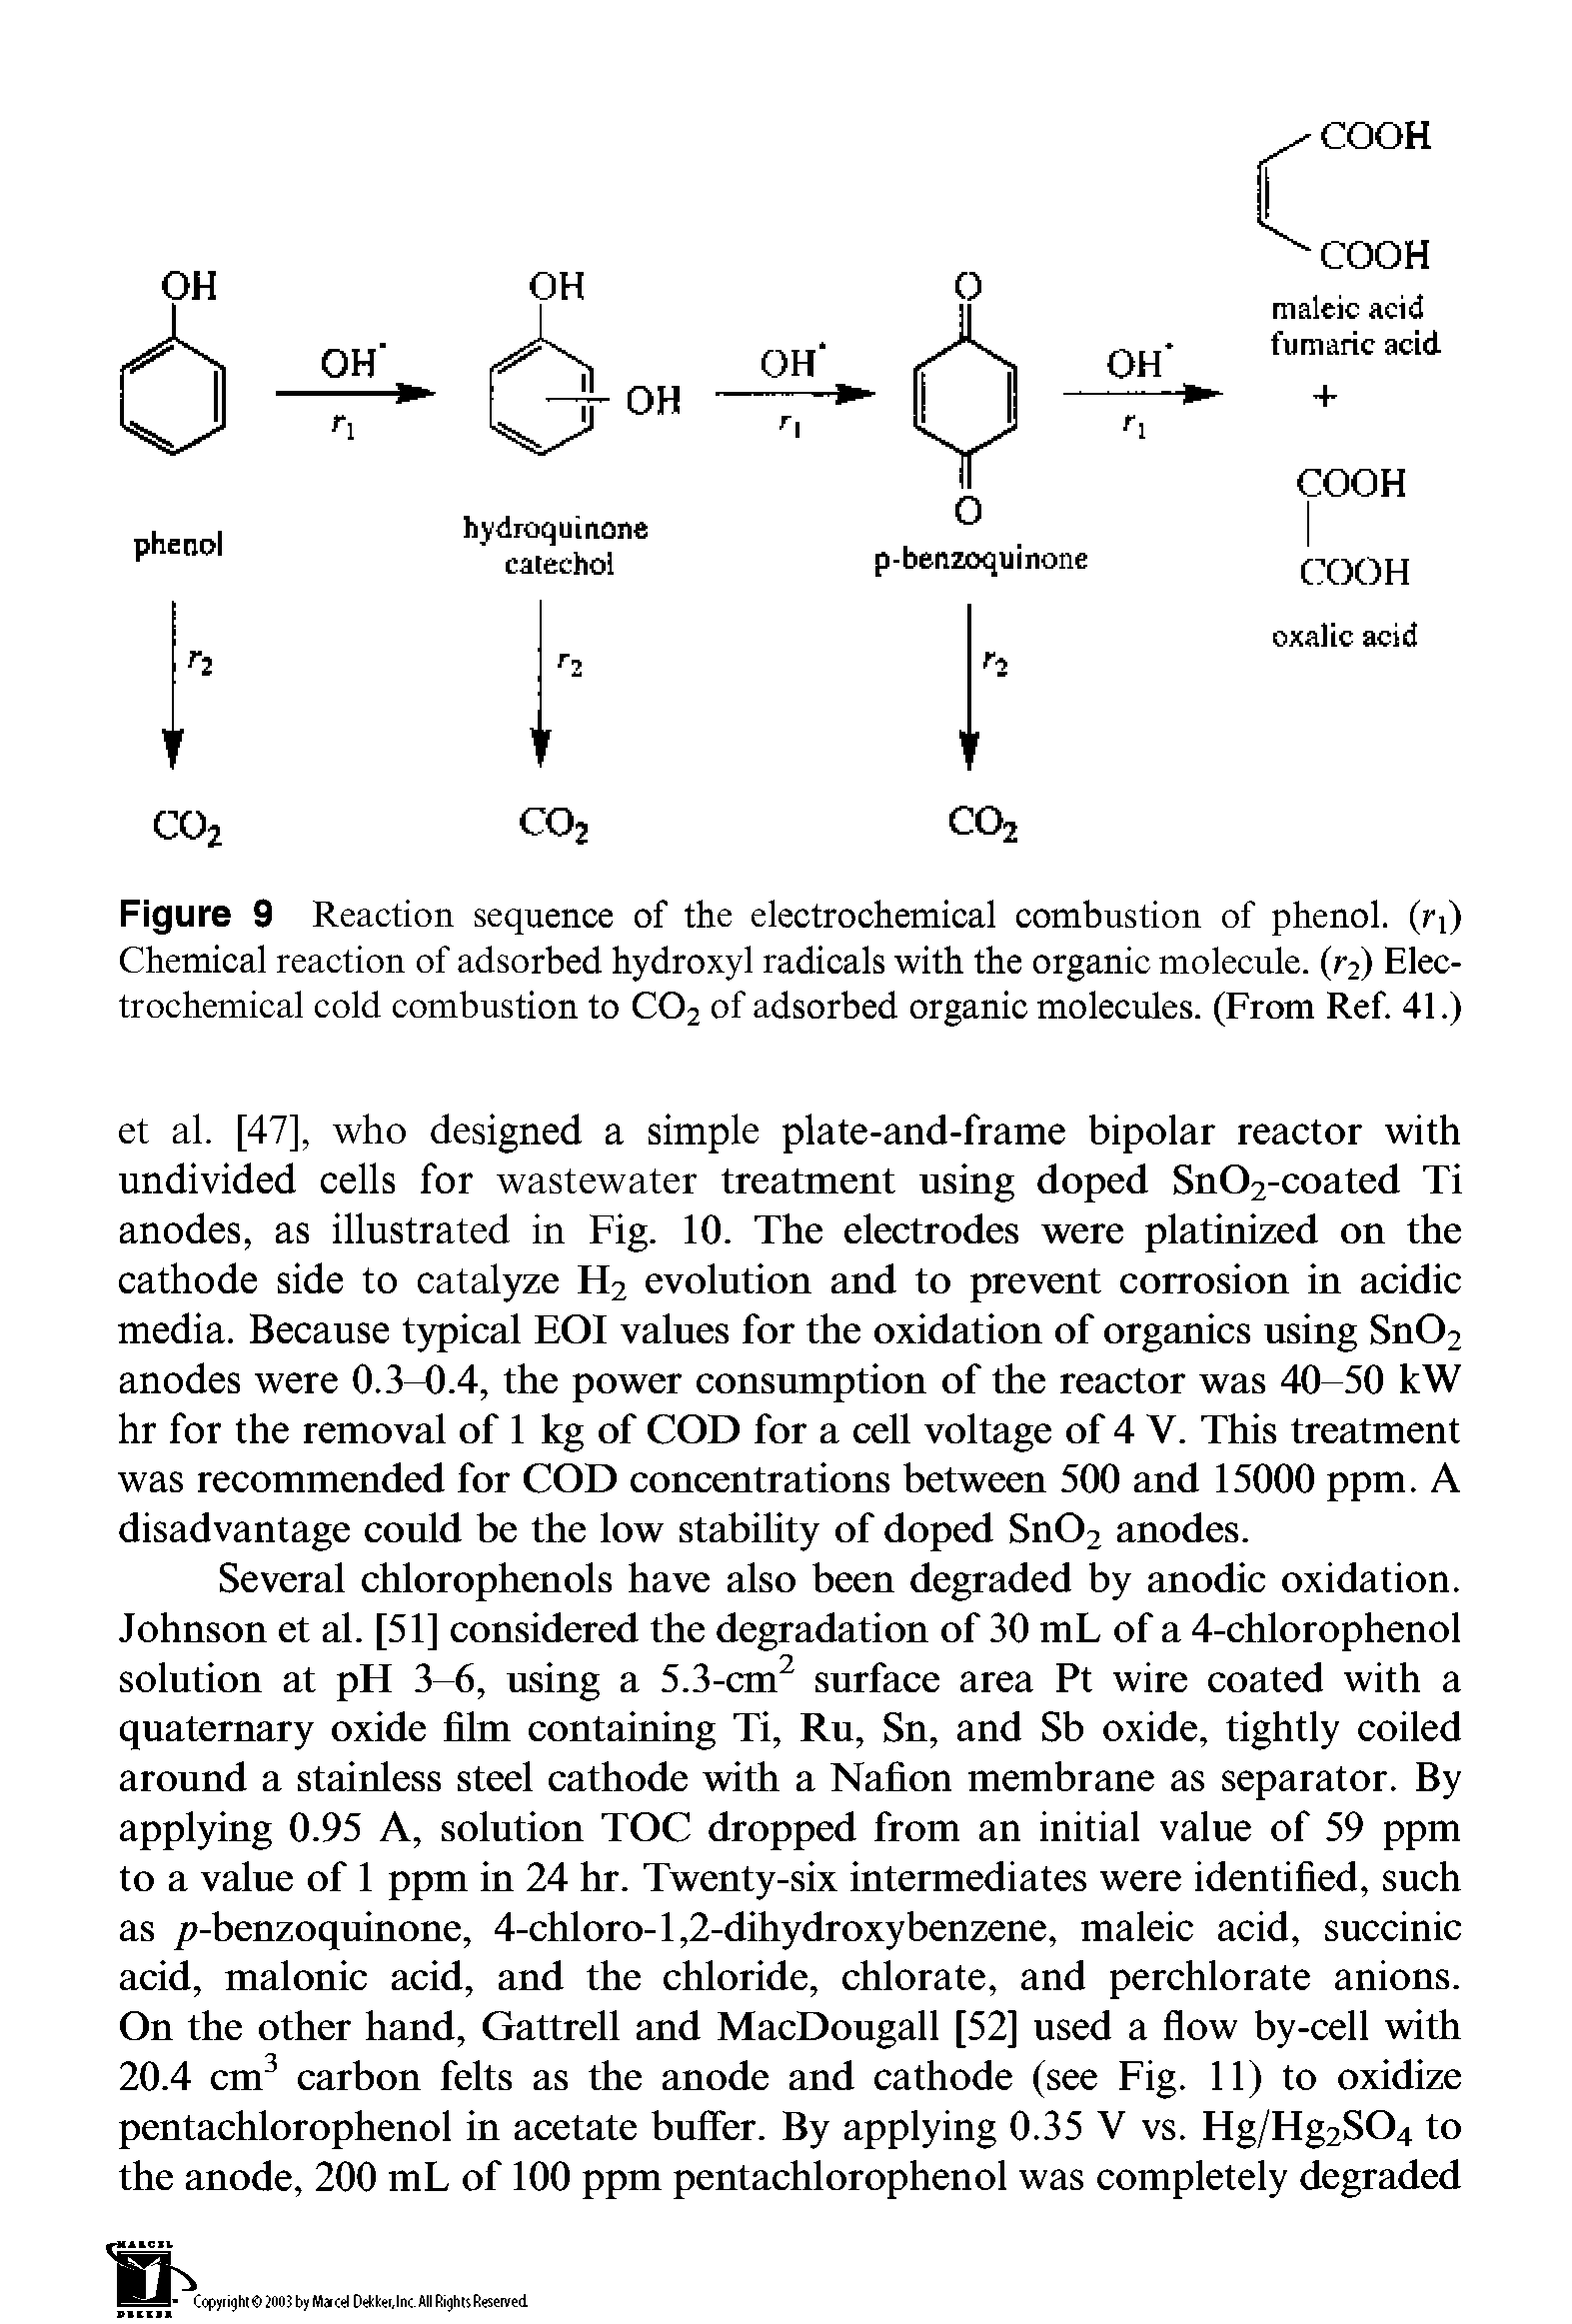 Figure 9 Reaction sequence of the electrochemical combustion of phenol. (>i) Chemical reaction of adsorbed hydroxyl radicals with the organic molecule. (r2) Electrochemical cold combustion to CO, of adsorbed organic molecules. (From Ref. 41.)...